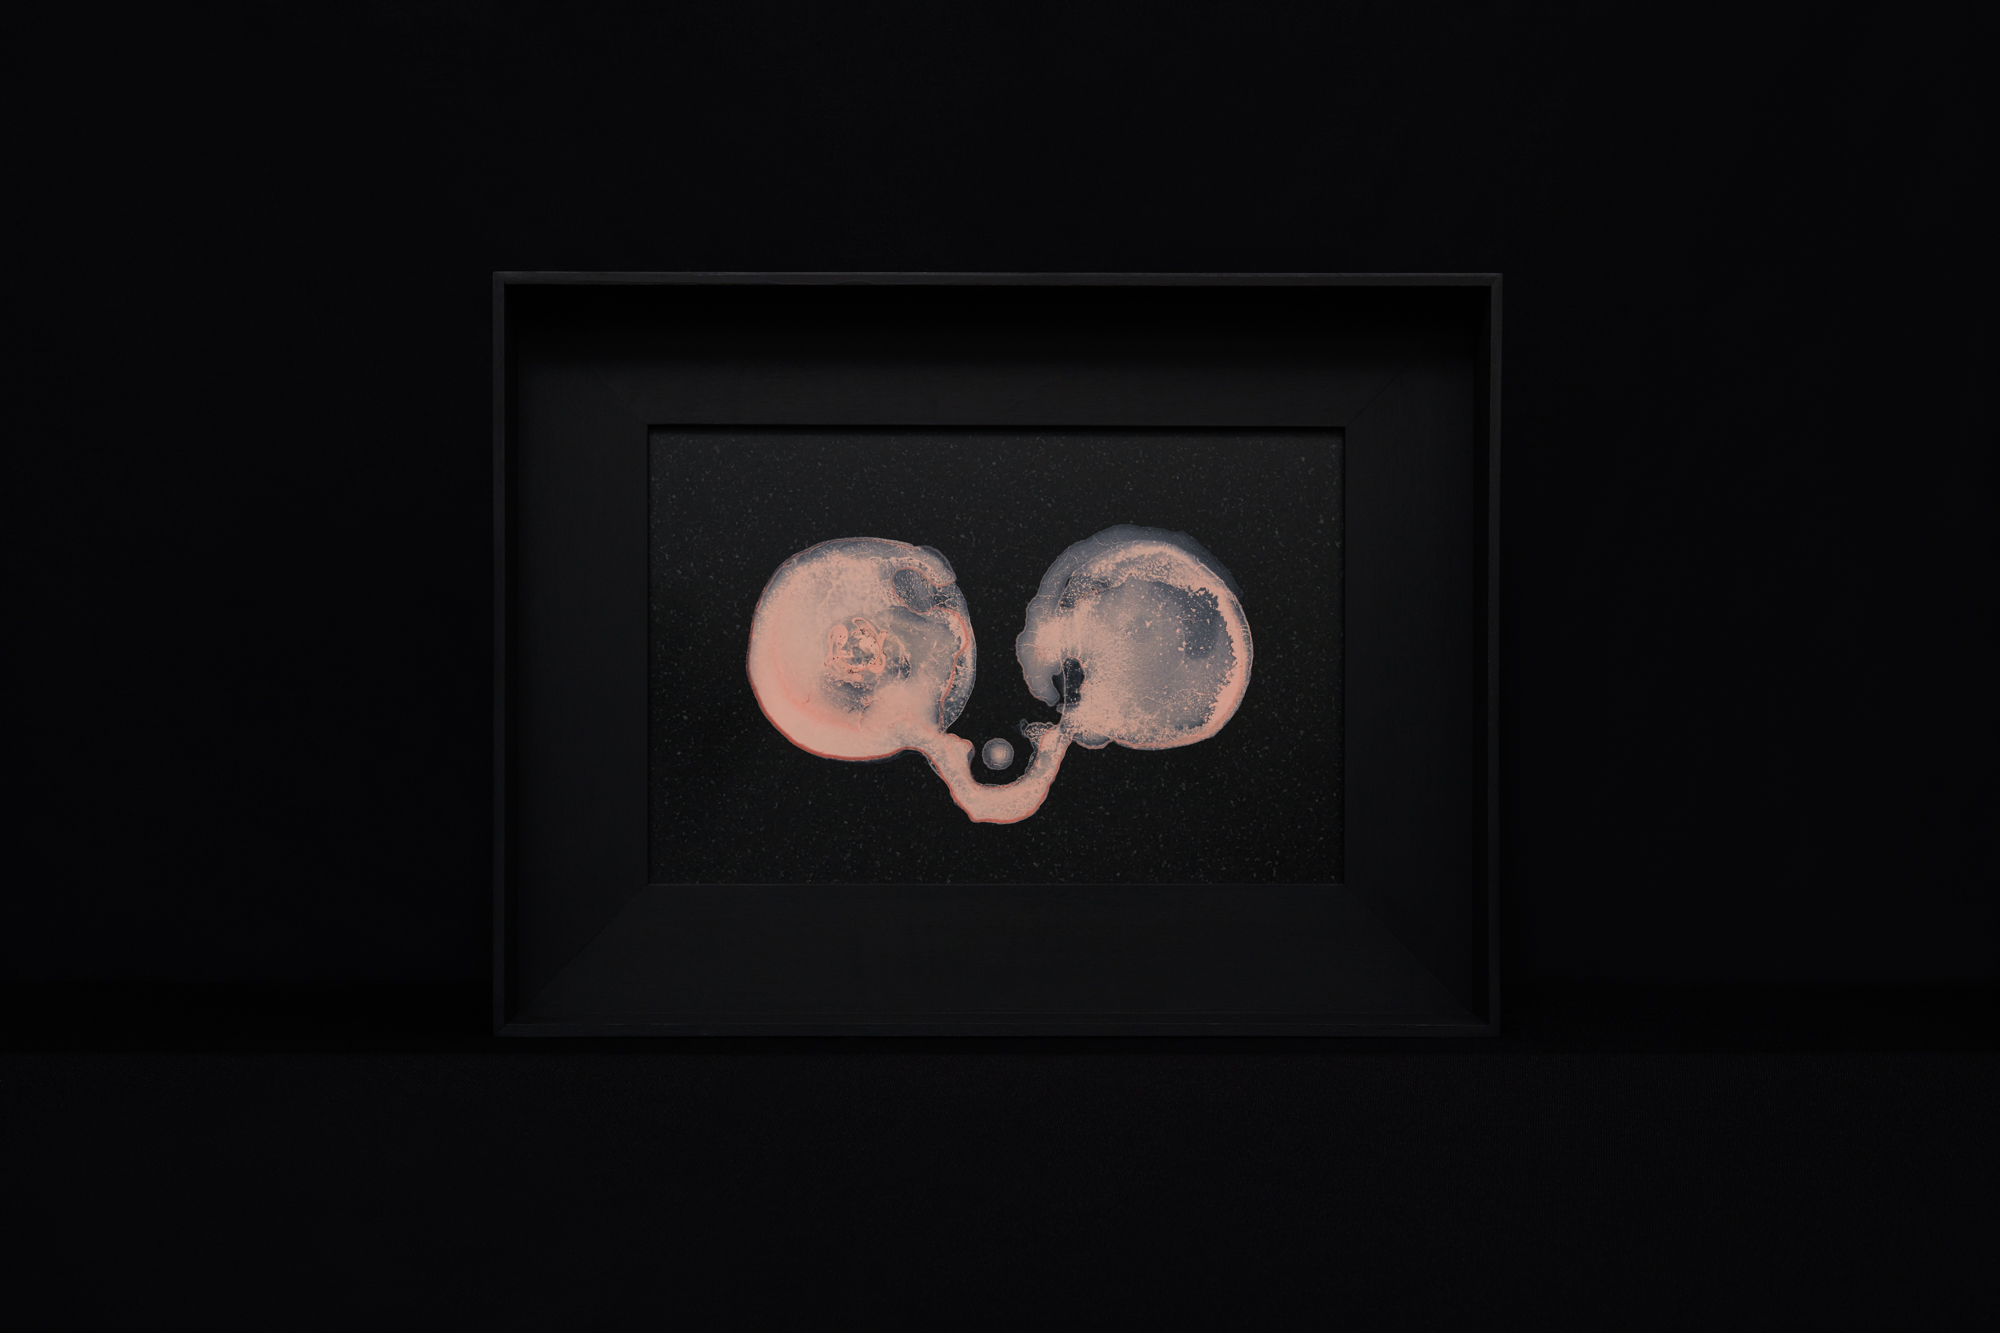    Hole#1: I'll die before you die, please (watercolor on marble. 12,5 x 16 inches framed, 2021)